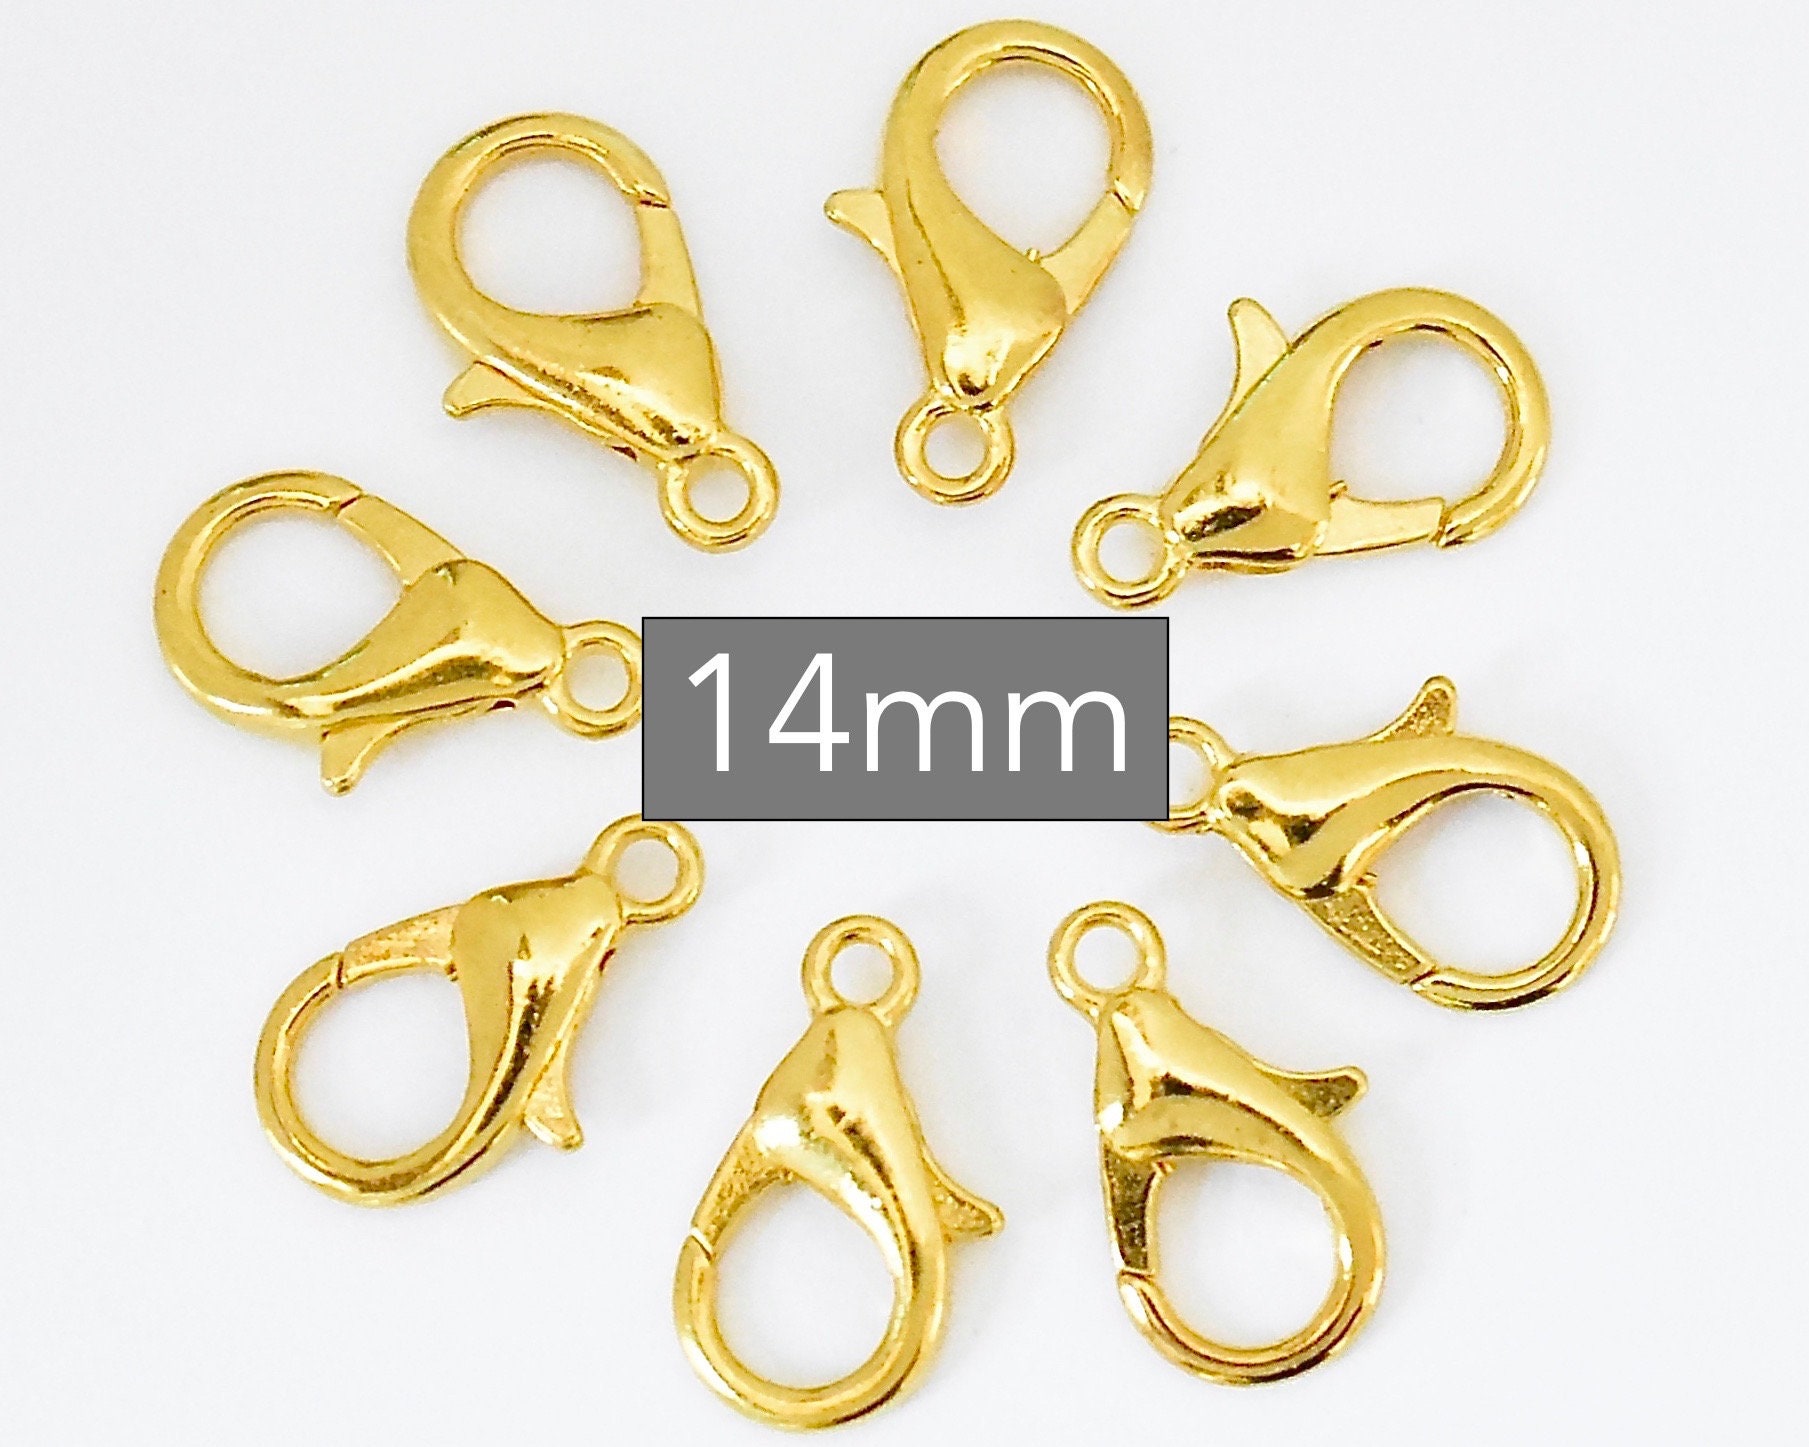 Lobster Clasp / Parrot Clasps (7mm x 14mm / 20 pcs / Gold Plated